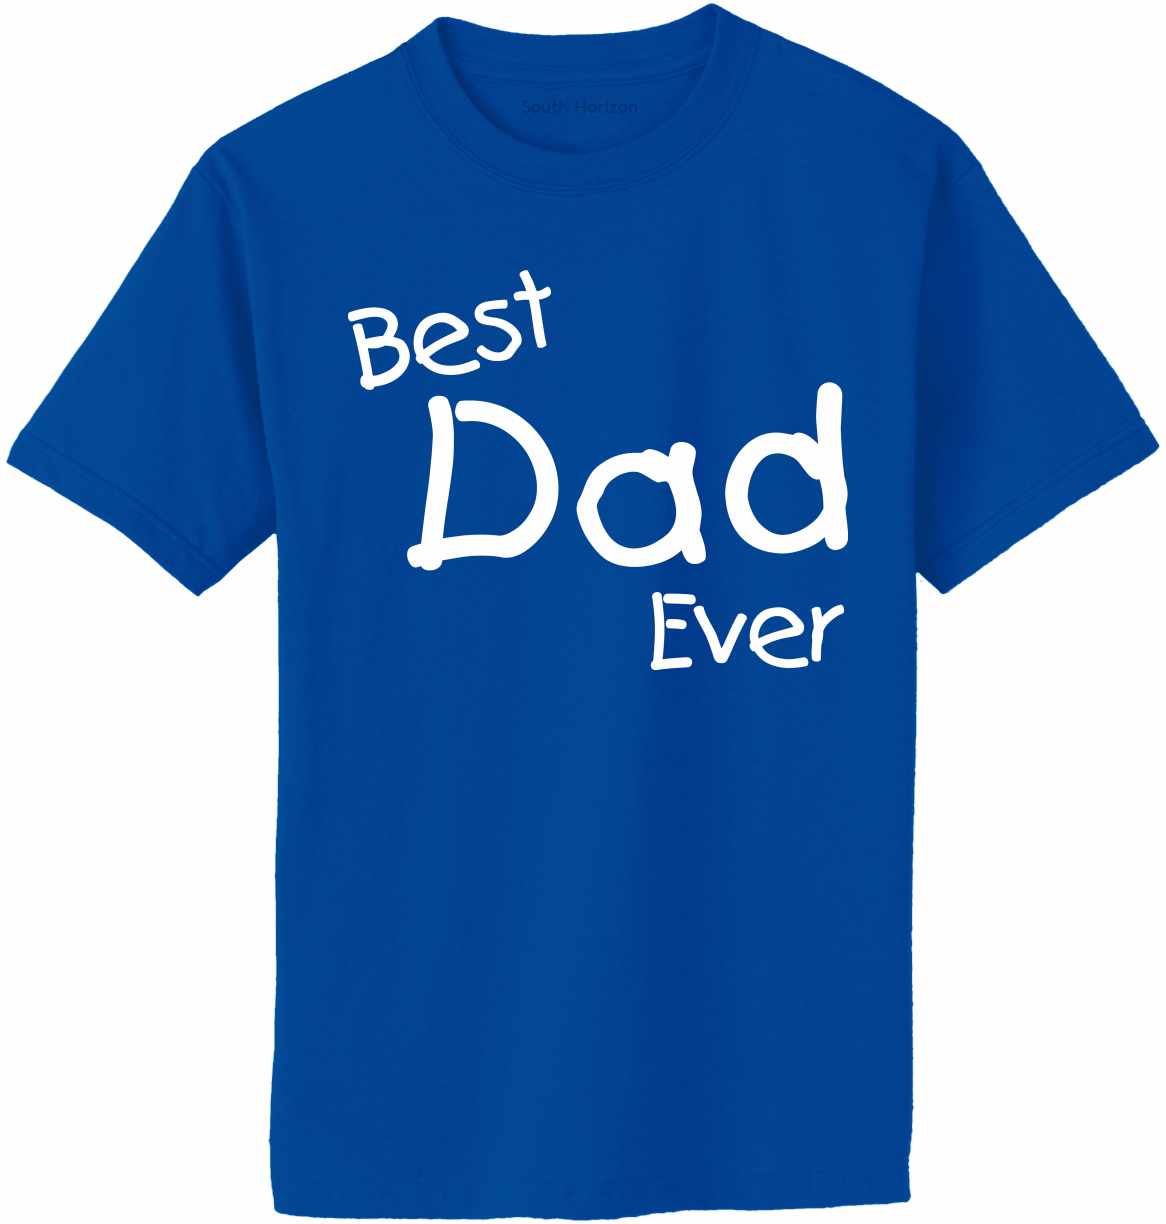 Best Dad Ever Adult T-Shirt